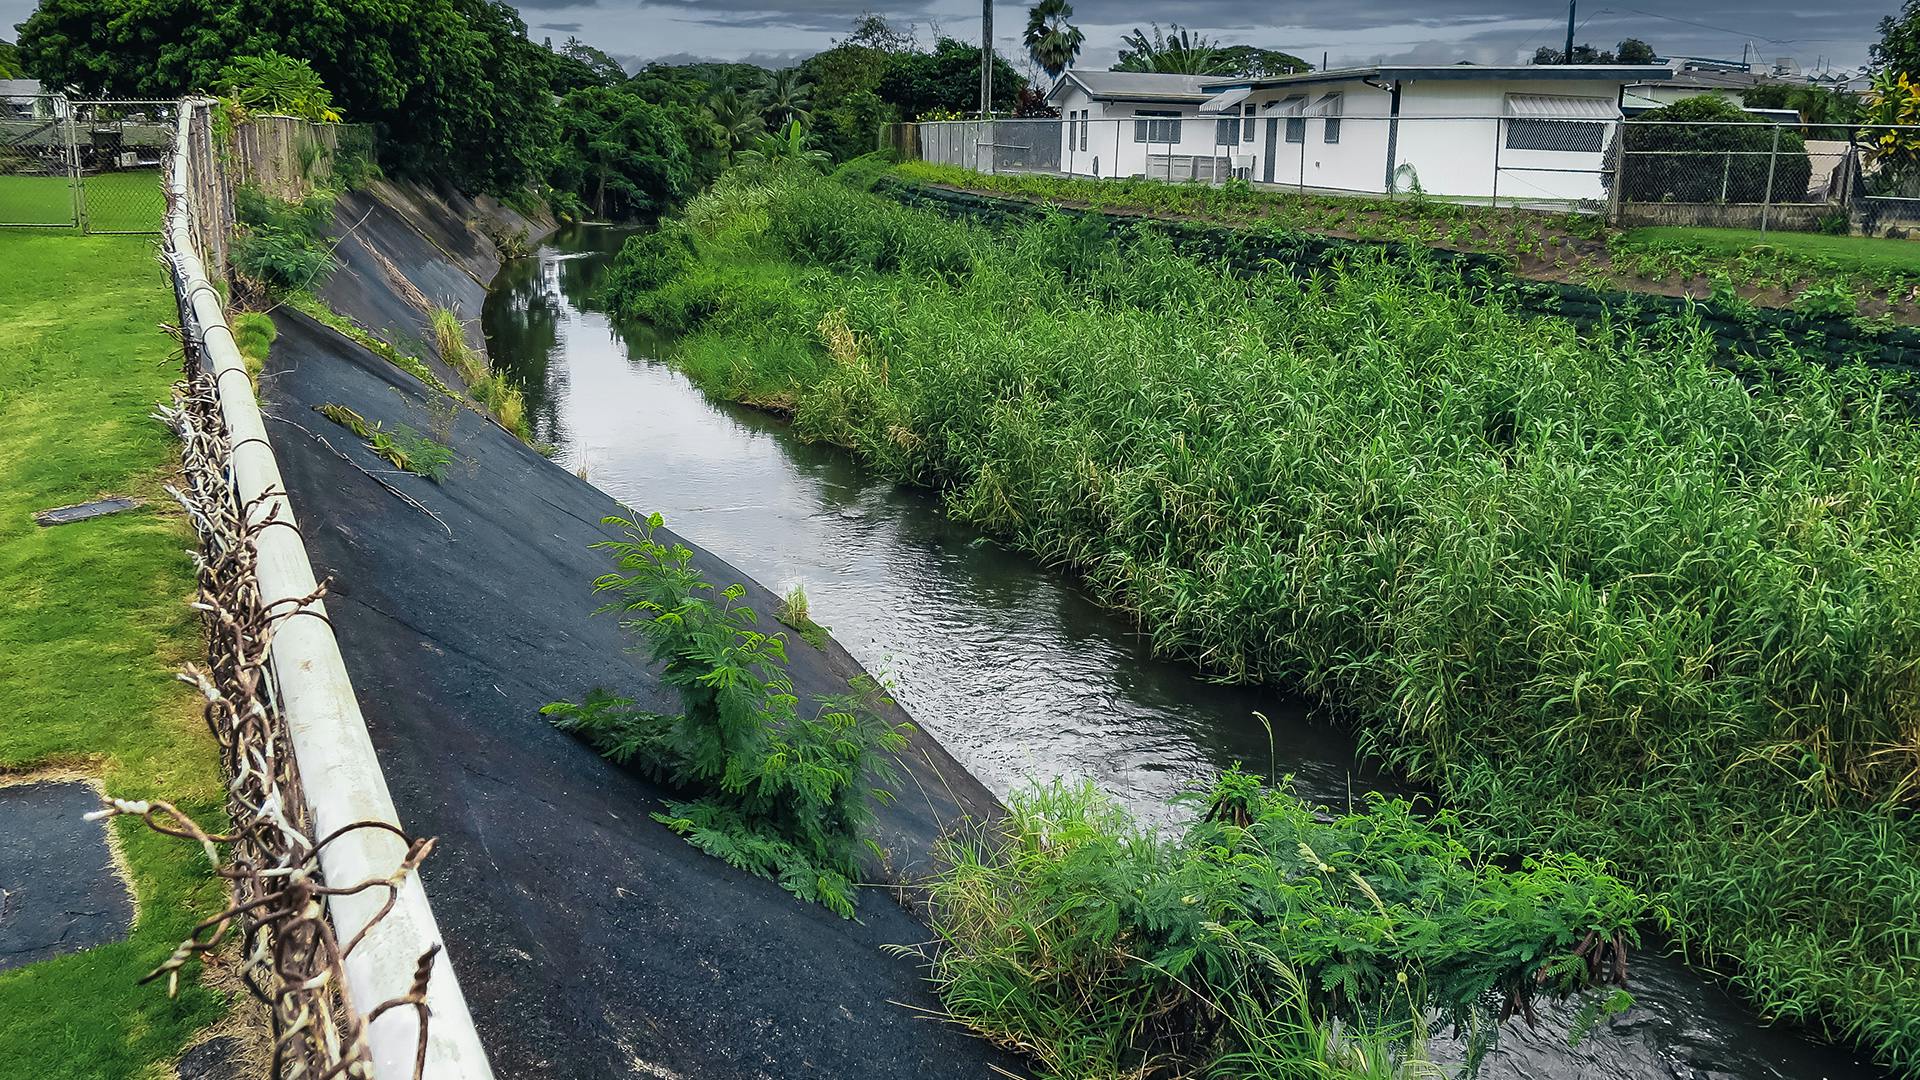 Hawaii's Kaneohe Stream stabilization project used PROPEX Pyrawall, a natural, vegetated solution, to protect properties and prevent flooding for up to 75 years. 